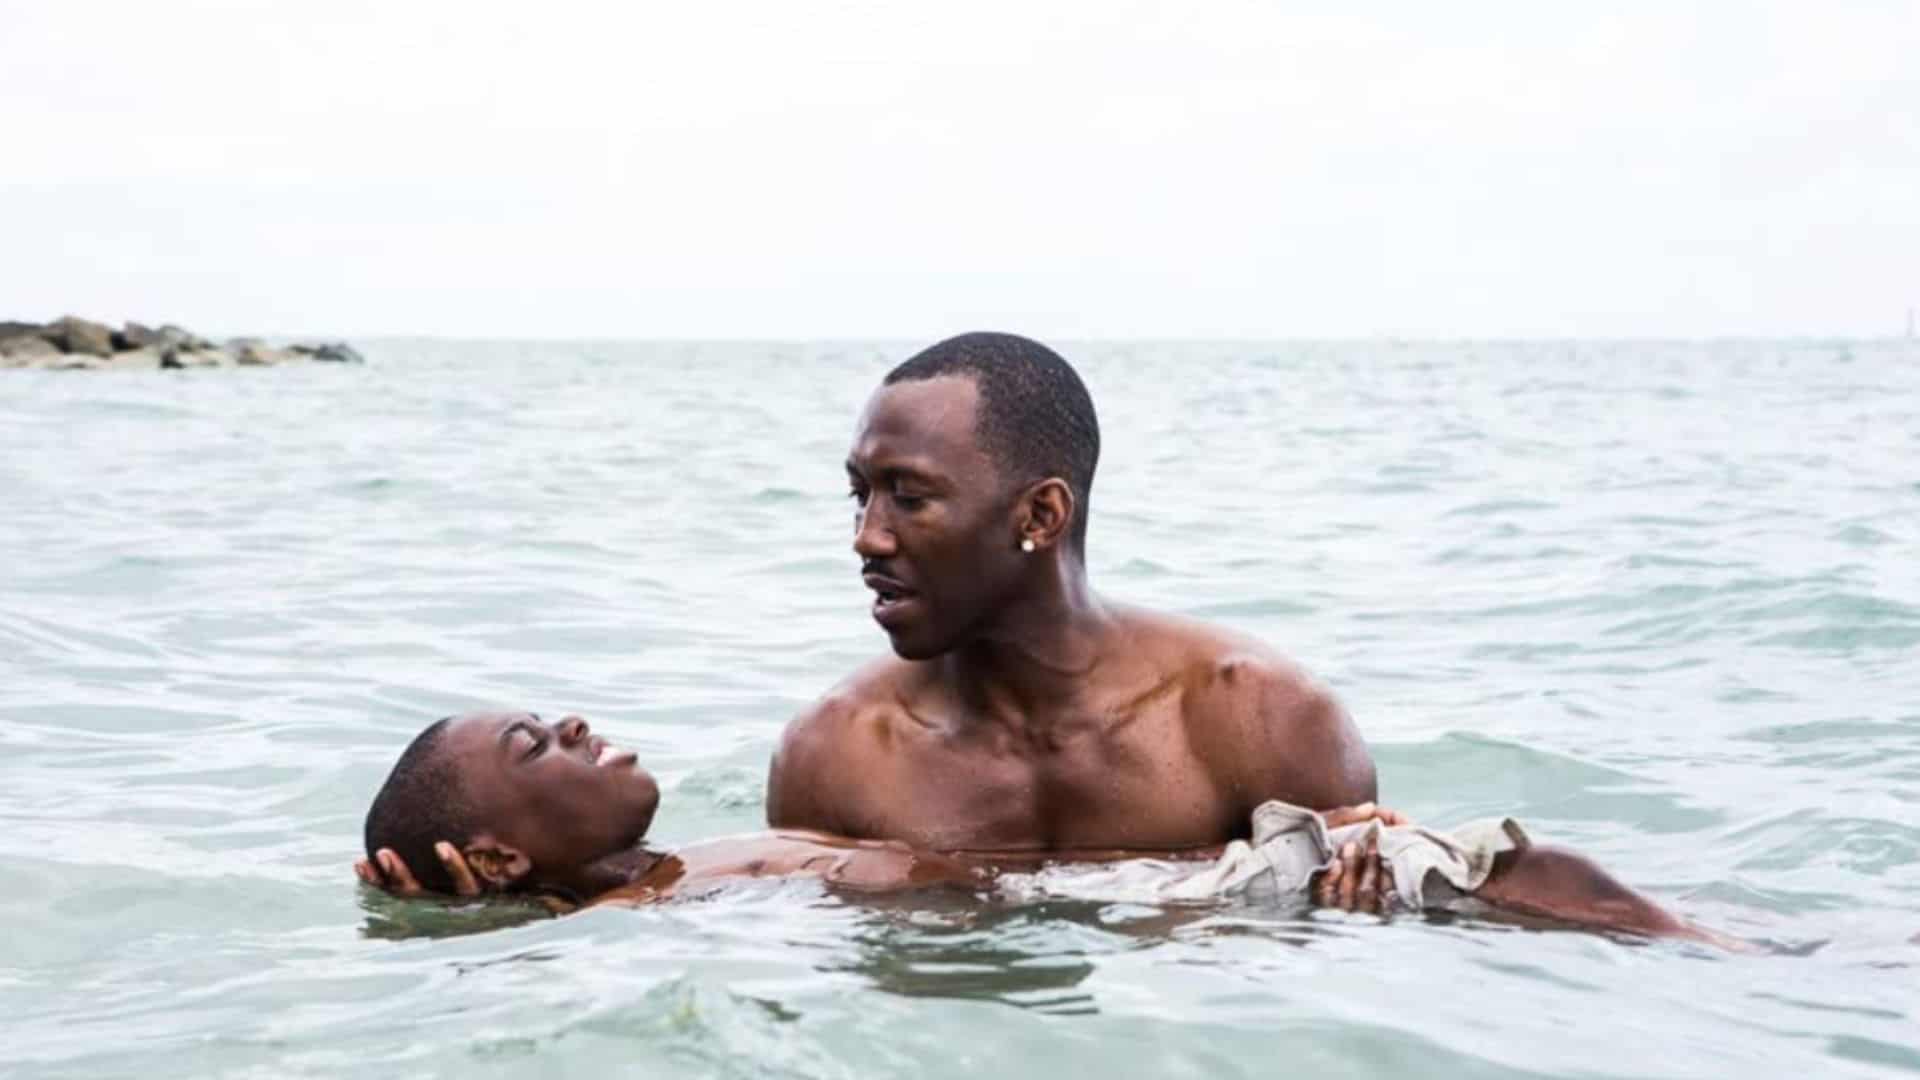 Mahershala Ali helps Alex R. Hibbert float in the water in this image from A24.